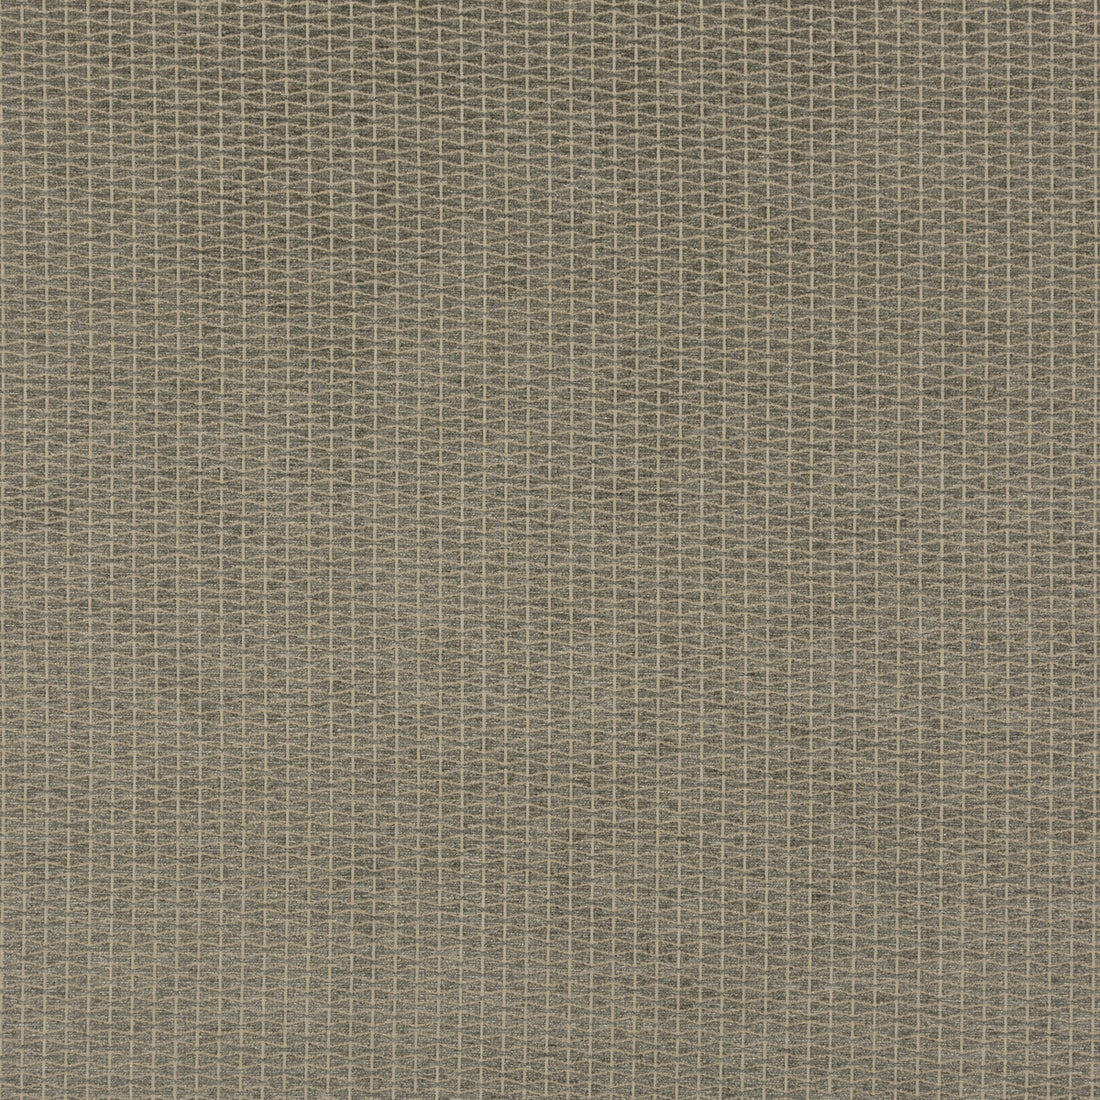 Vortex fabric in graphite color - pattern BF10681.970.0 - by G P &amp; J Baker in the Essential Colours collection